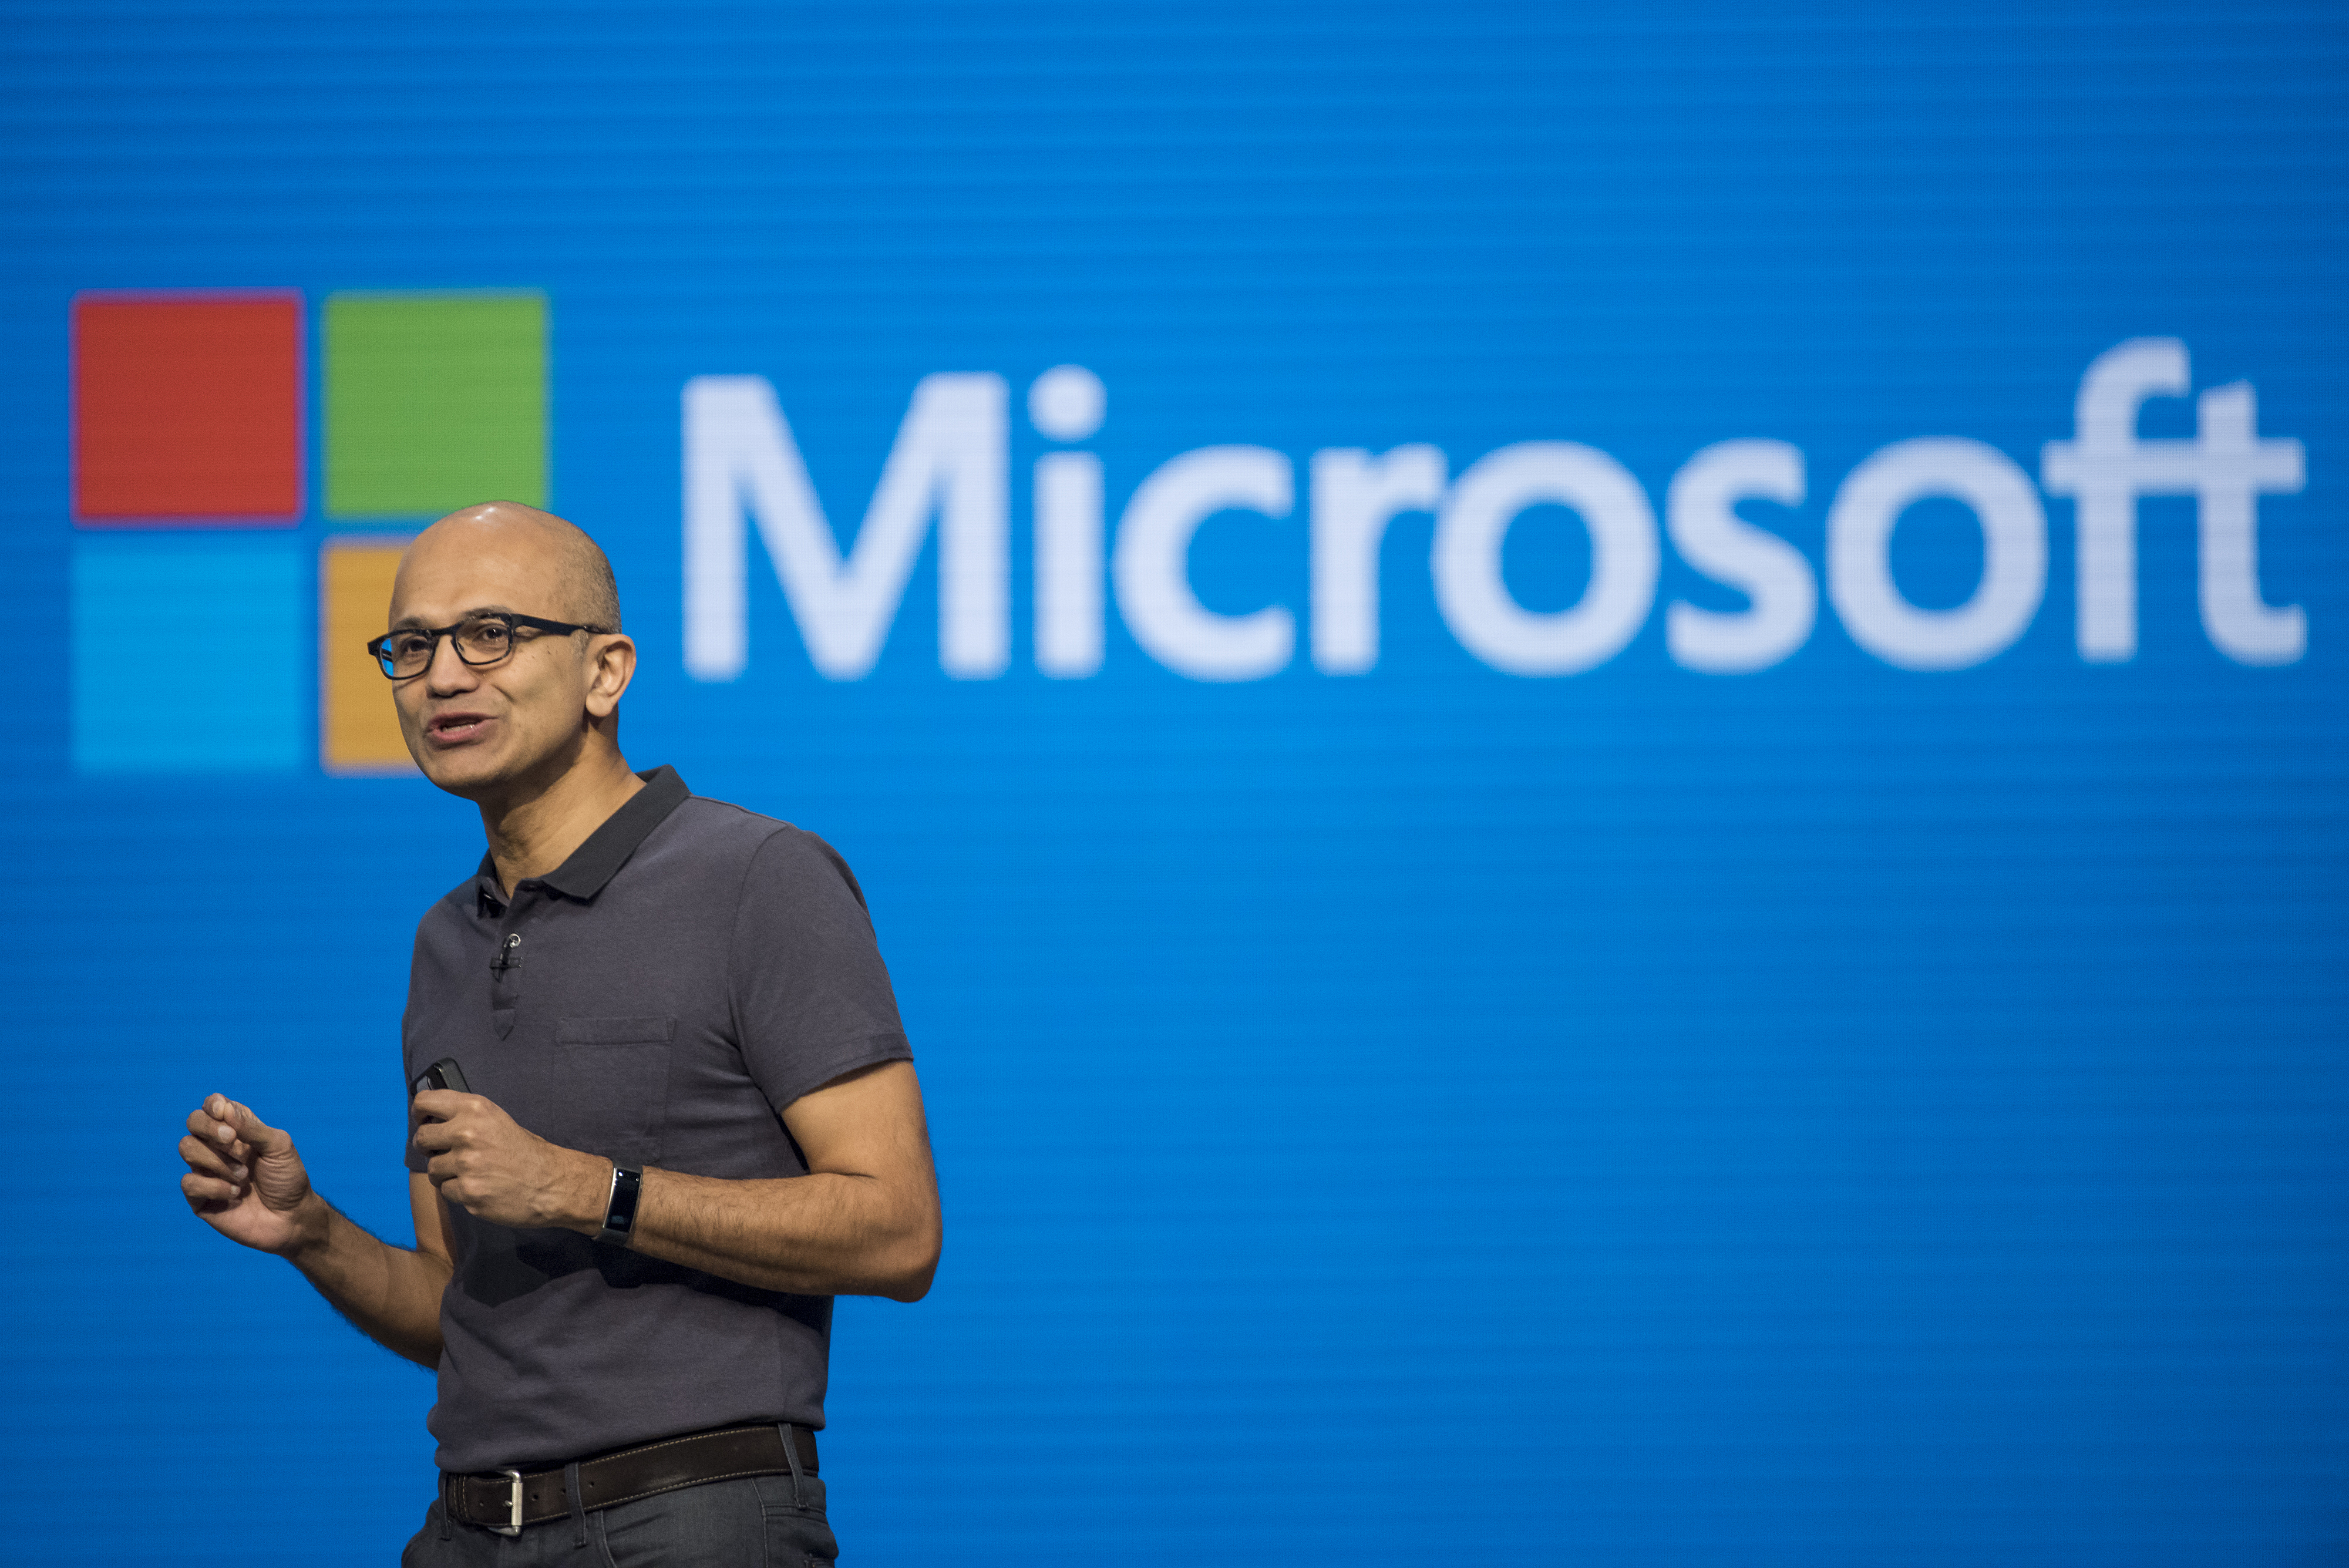 Satya Nadella, chief executive officer of Microsoft Corp., speaks during a keynote session at the Microsoft Developers Build Conference in San Francisco, California, U.S., on Wednesday, March 30, 2016. (Paul Morris—Bloomberg/Getty Images)